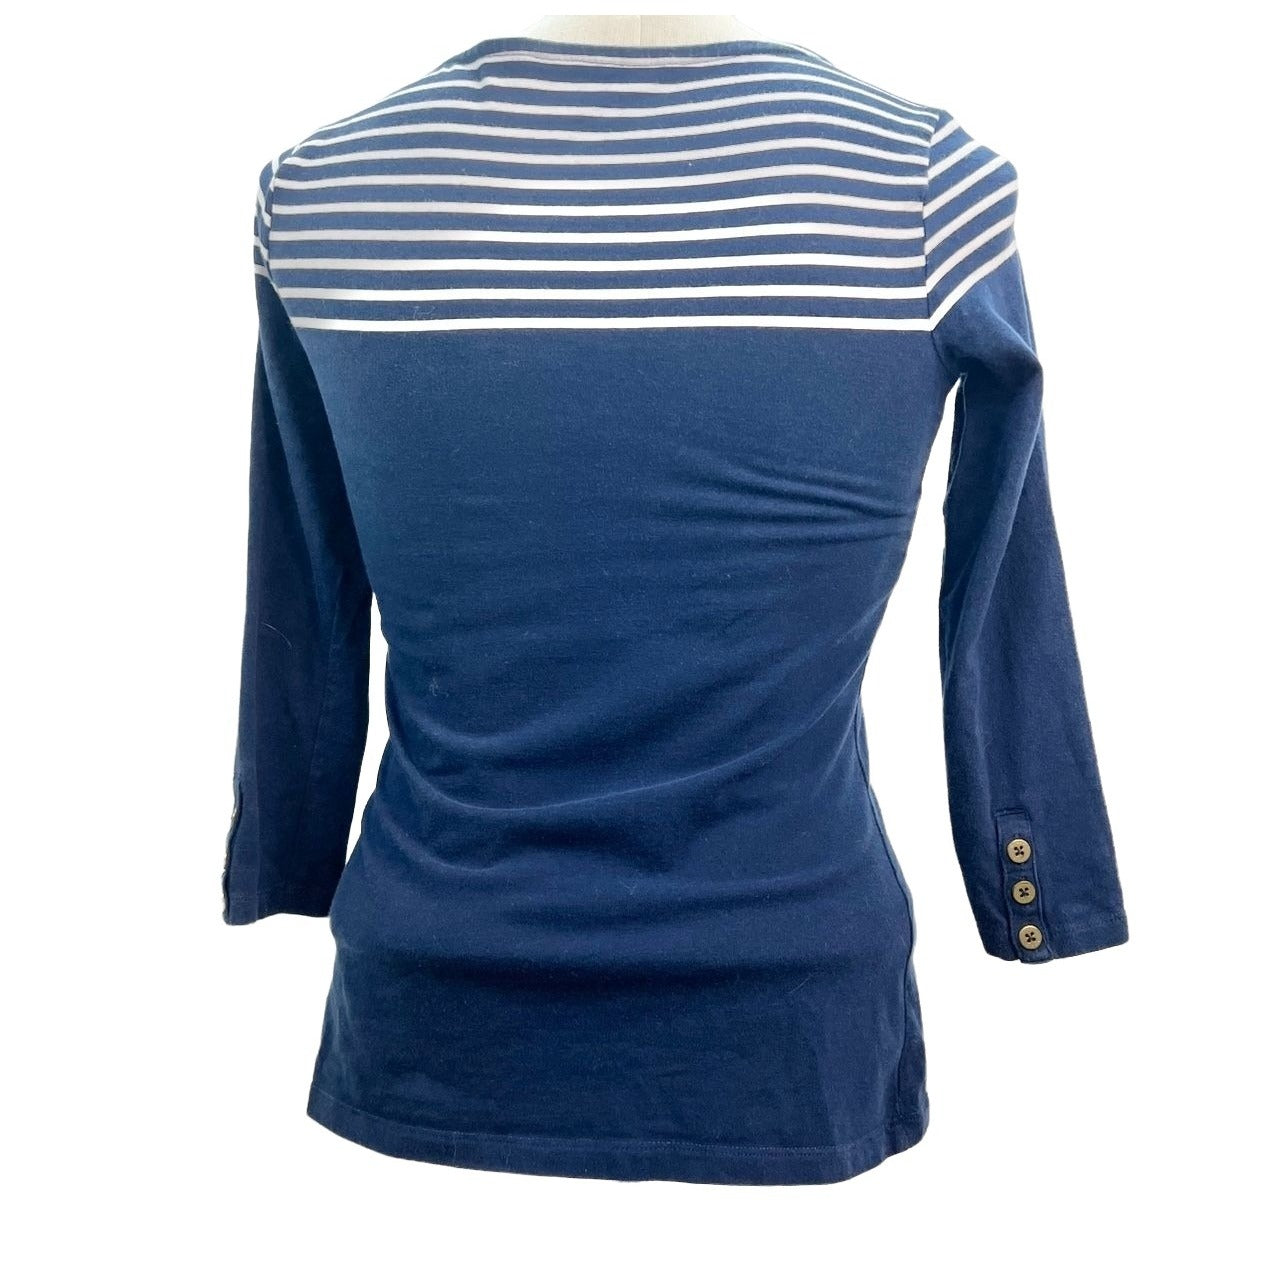 Tommy Hilfiger 3/4 Sleeve Top Tiffany\'s – Stripe Trinkets and XS Womens Treasures Blue White